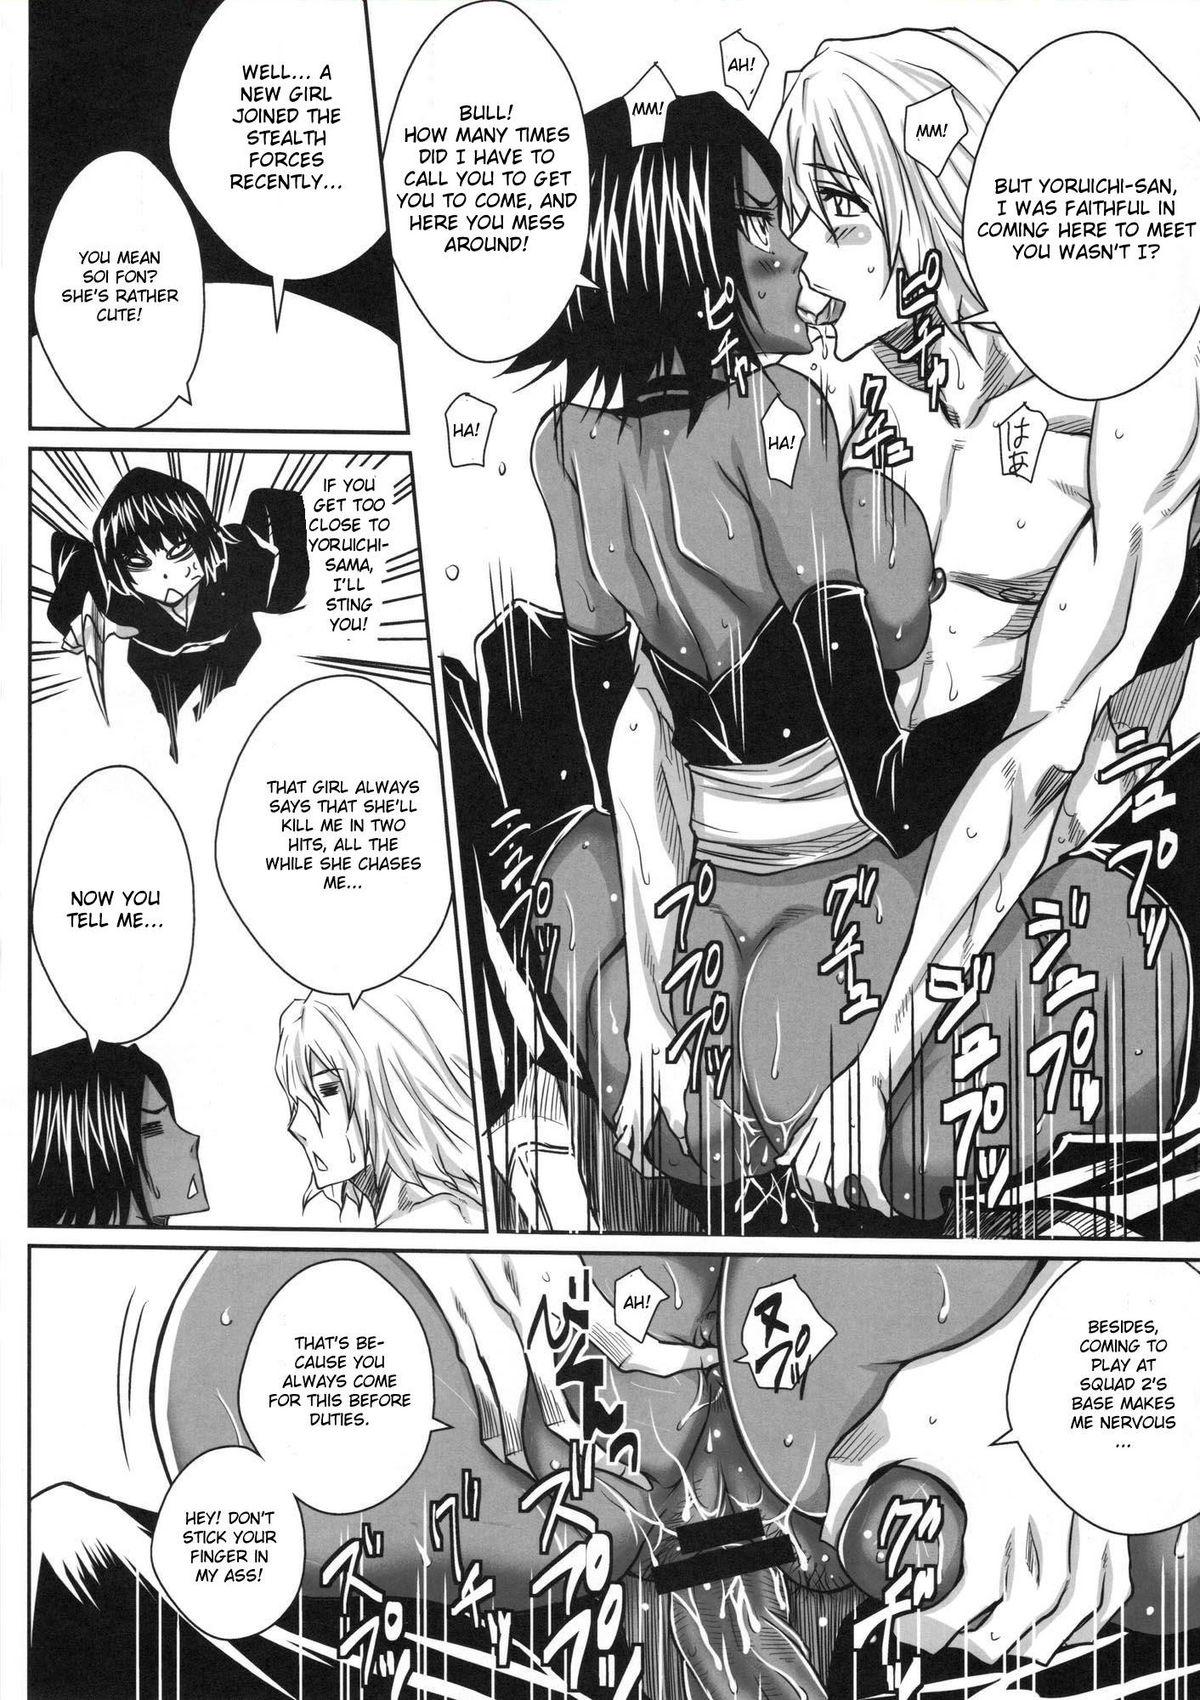 Mouth Yoru | Night - Bleach Married - Page 4